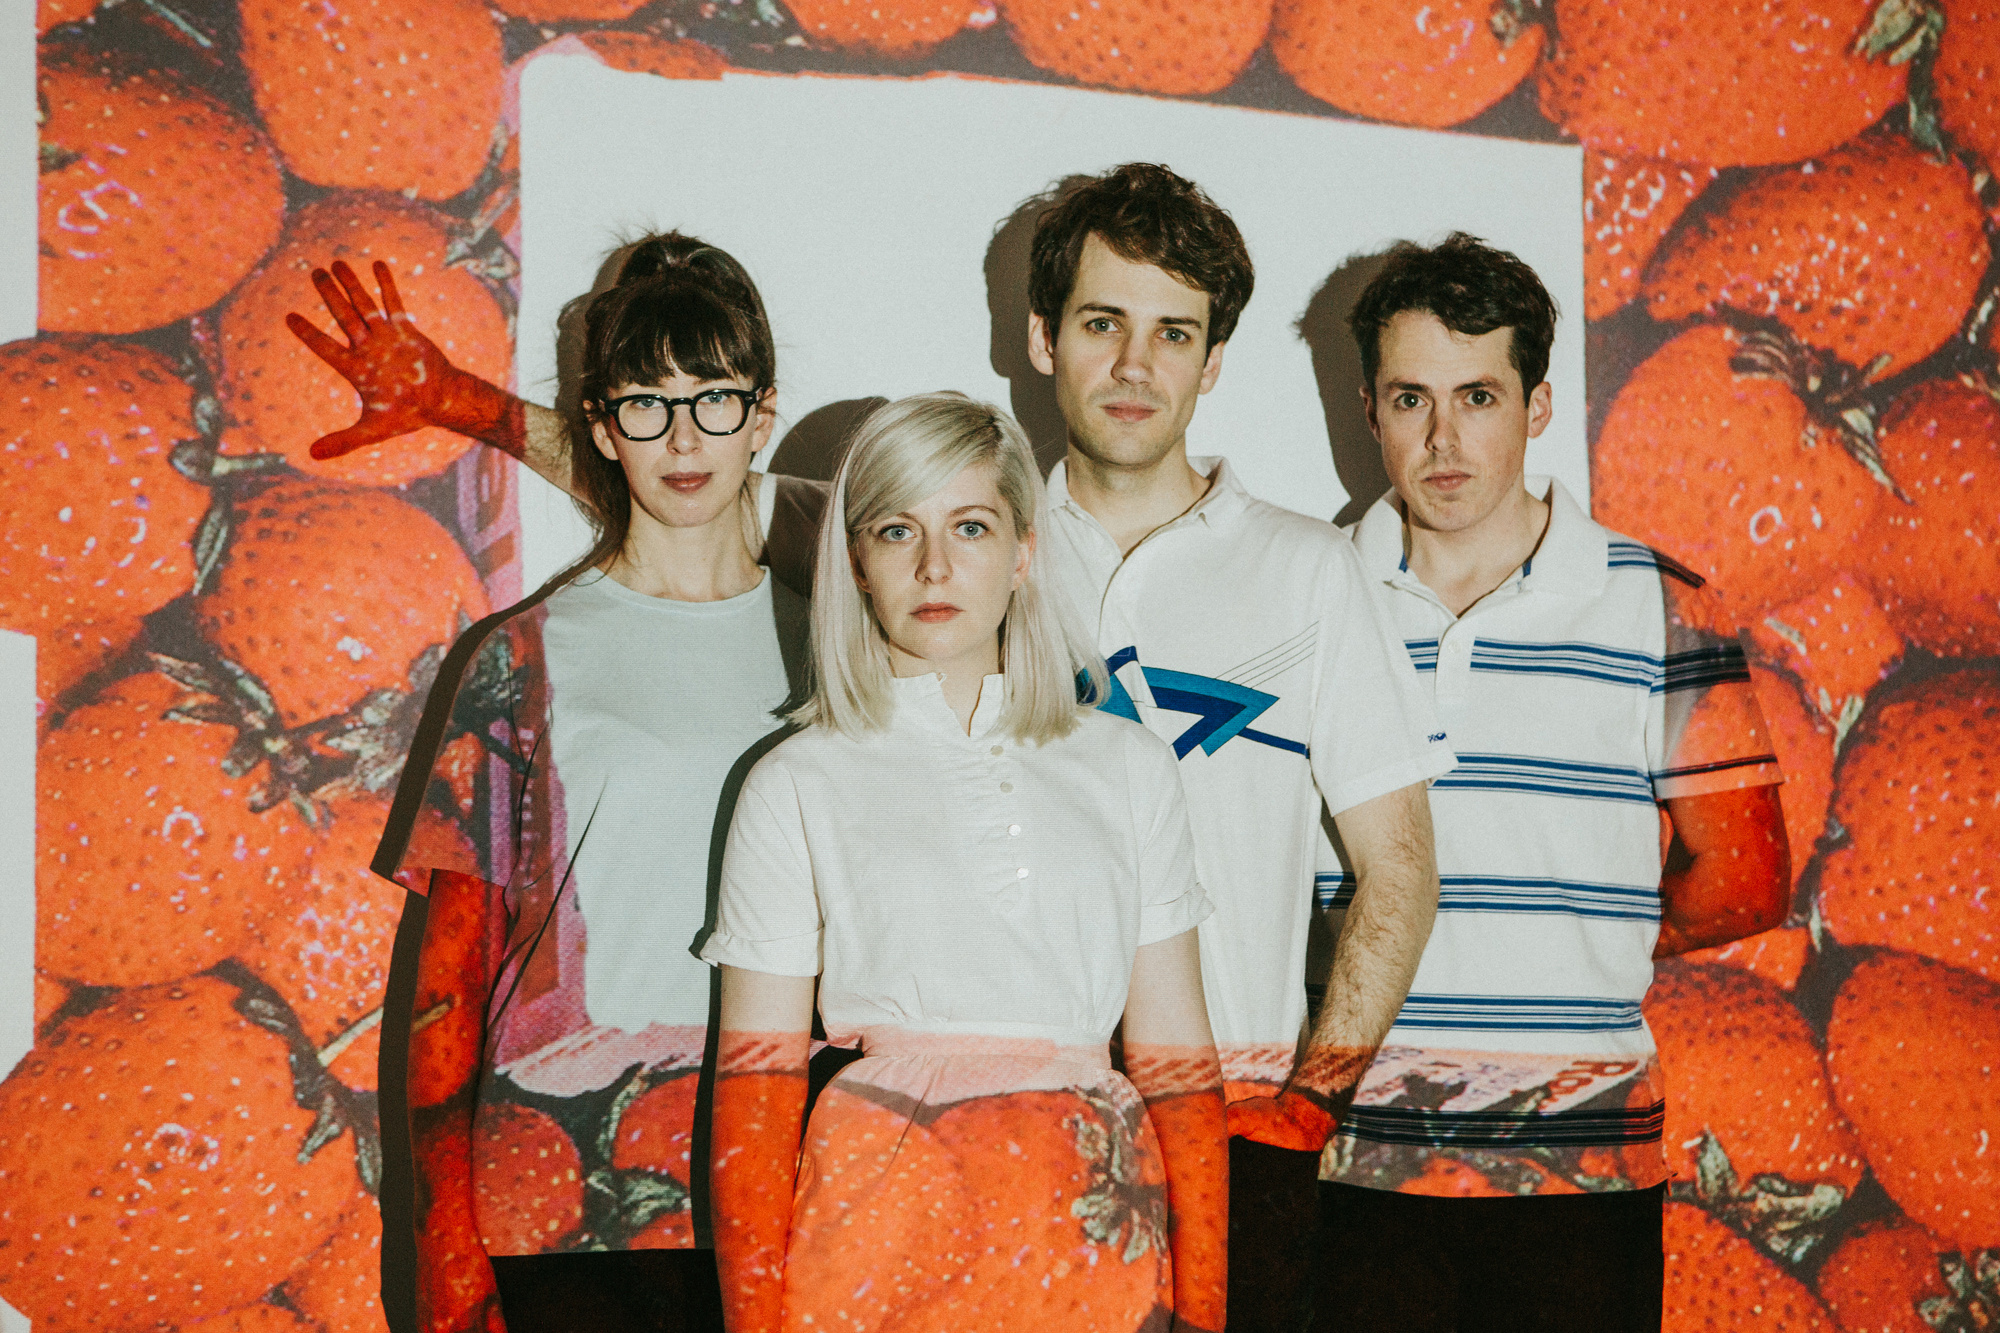 Alvvays roots and grooves, Signl interview, Musical explorations, New music inspiration, 2000x1340 HD Desktop